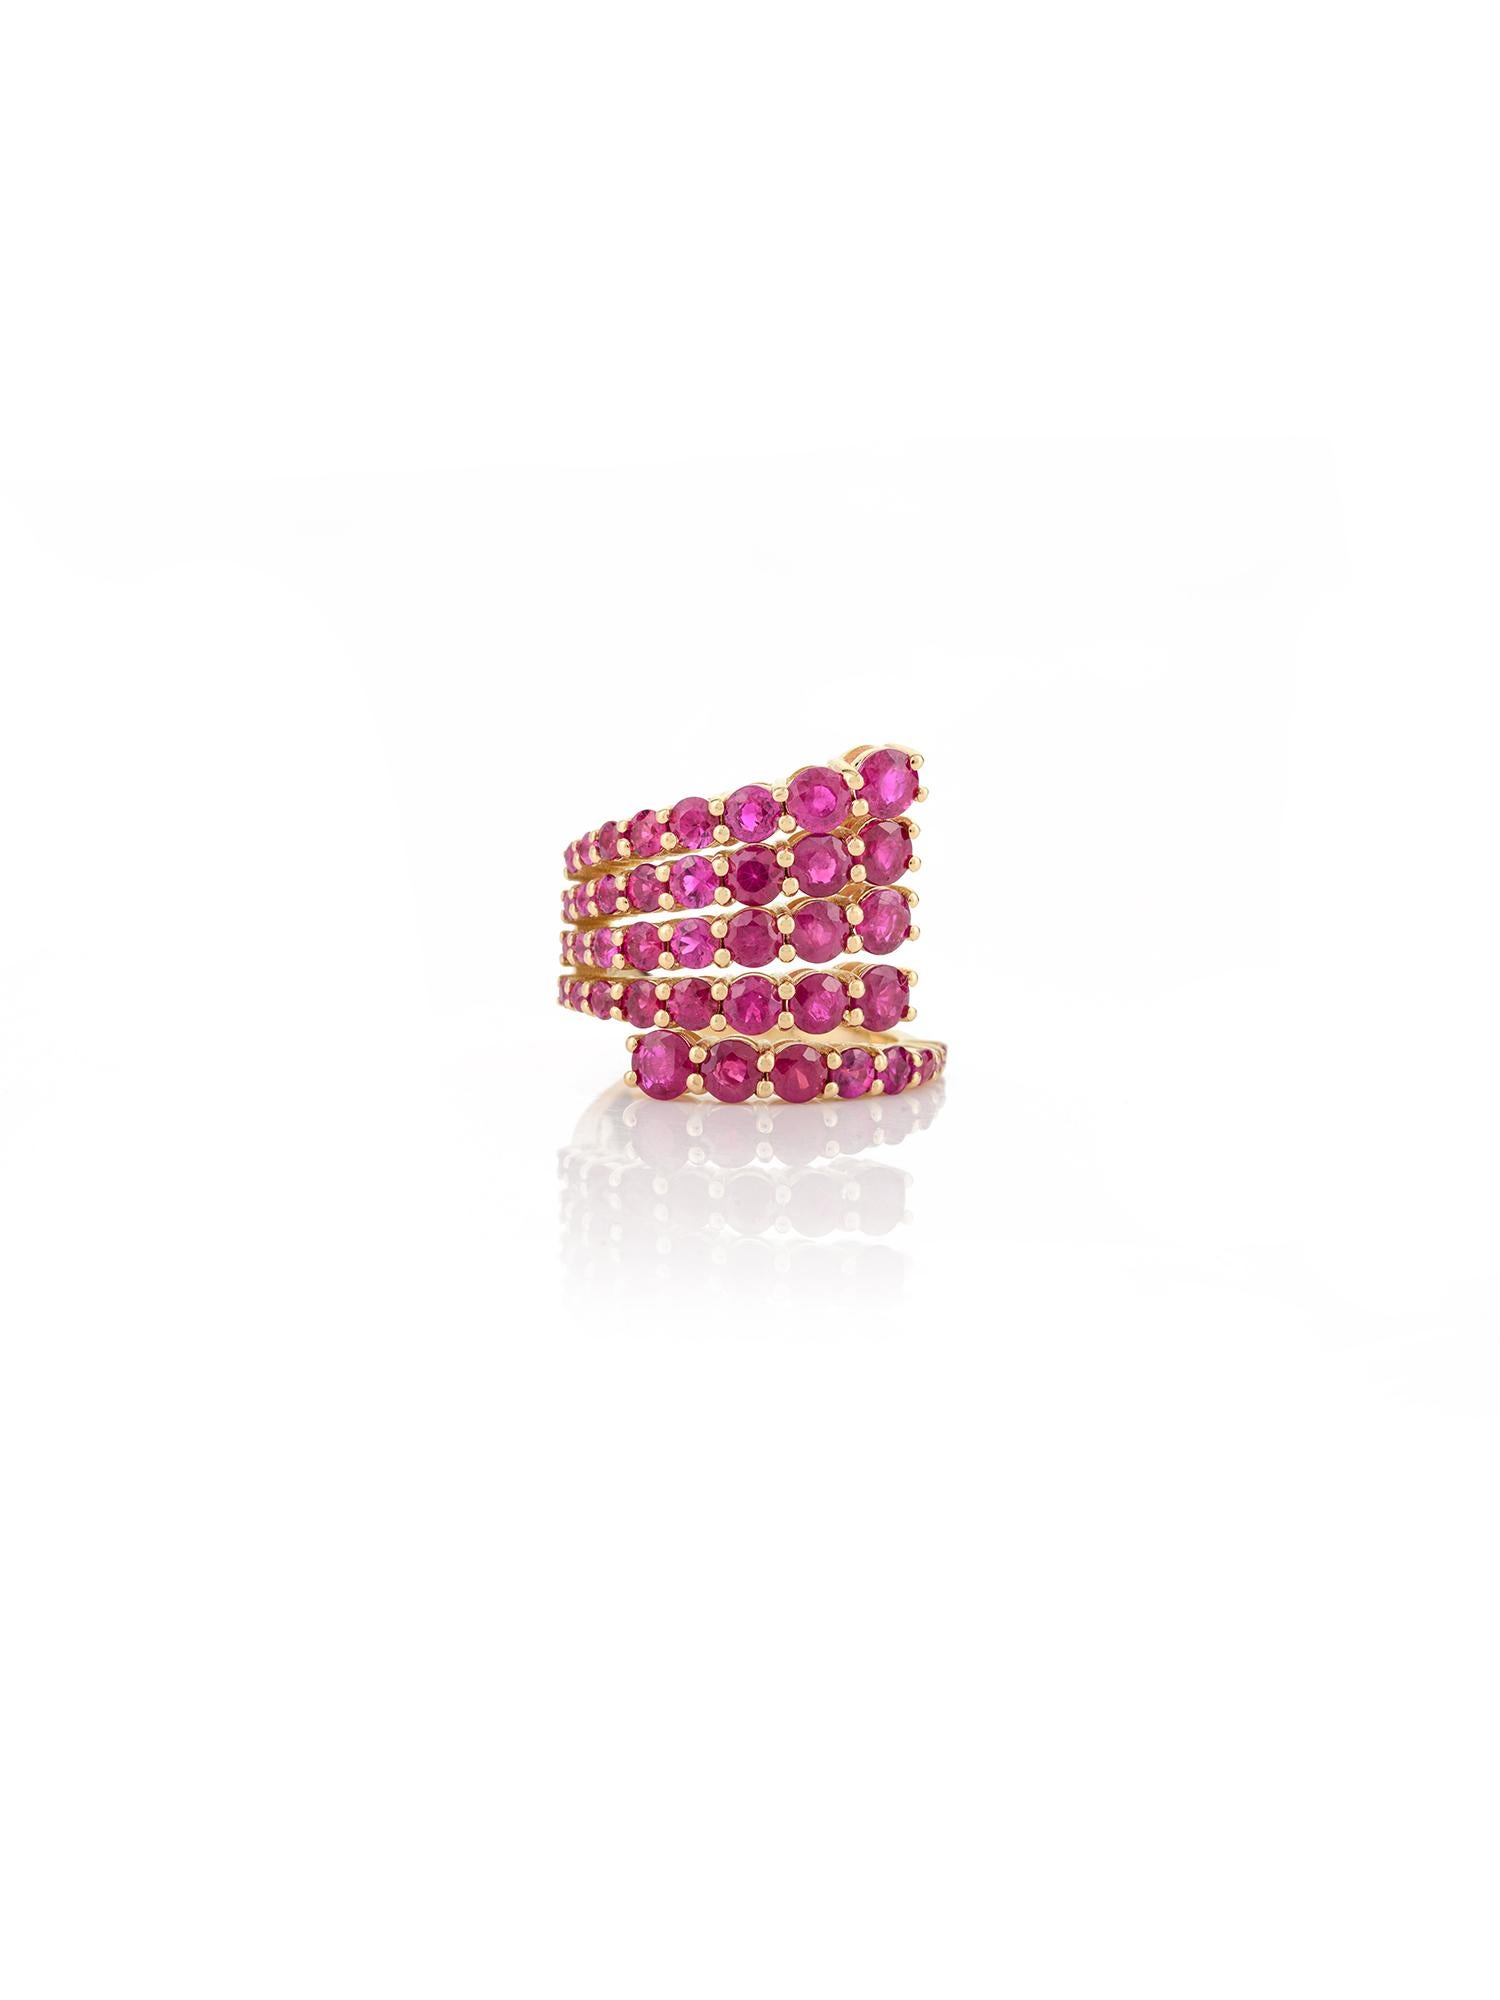 For Sale:  18k Yellow Gold Designer Multi Wrap 5.1 CTW Ruby Cocktail Ring Gift for Women 7